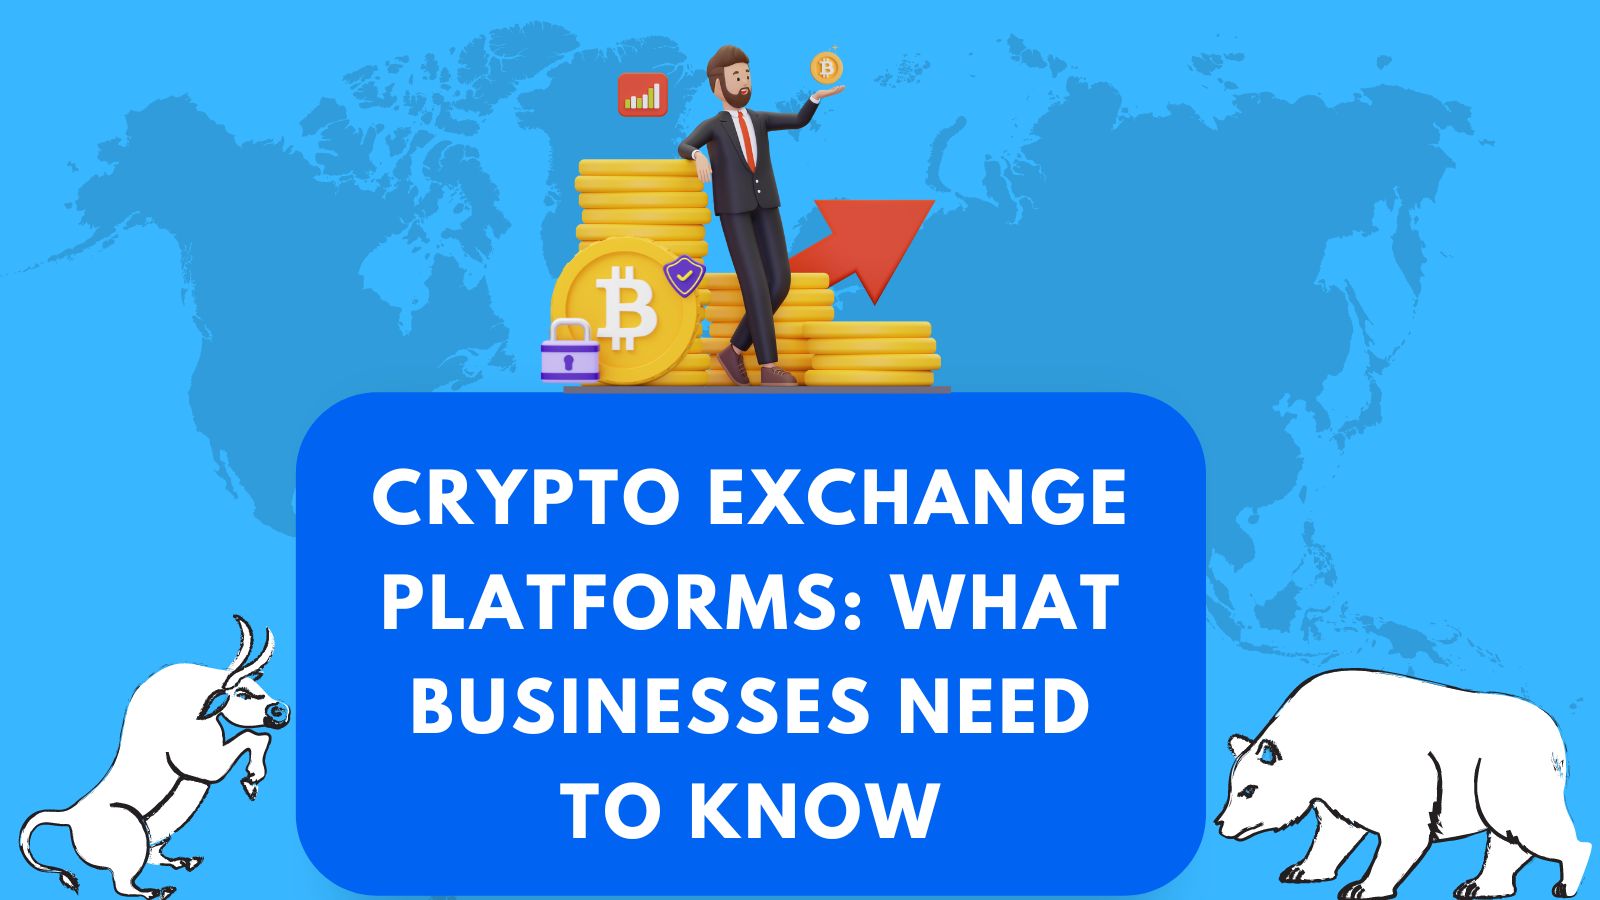 Article about Crypto Exchange Platforms: What Businesses Need to Know